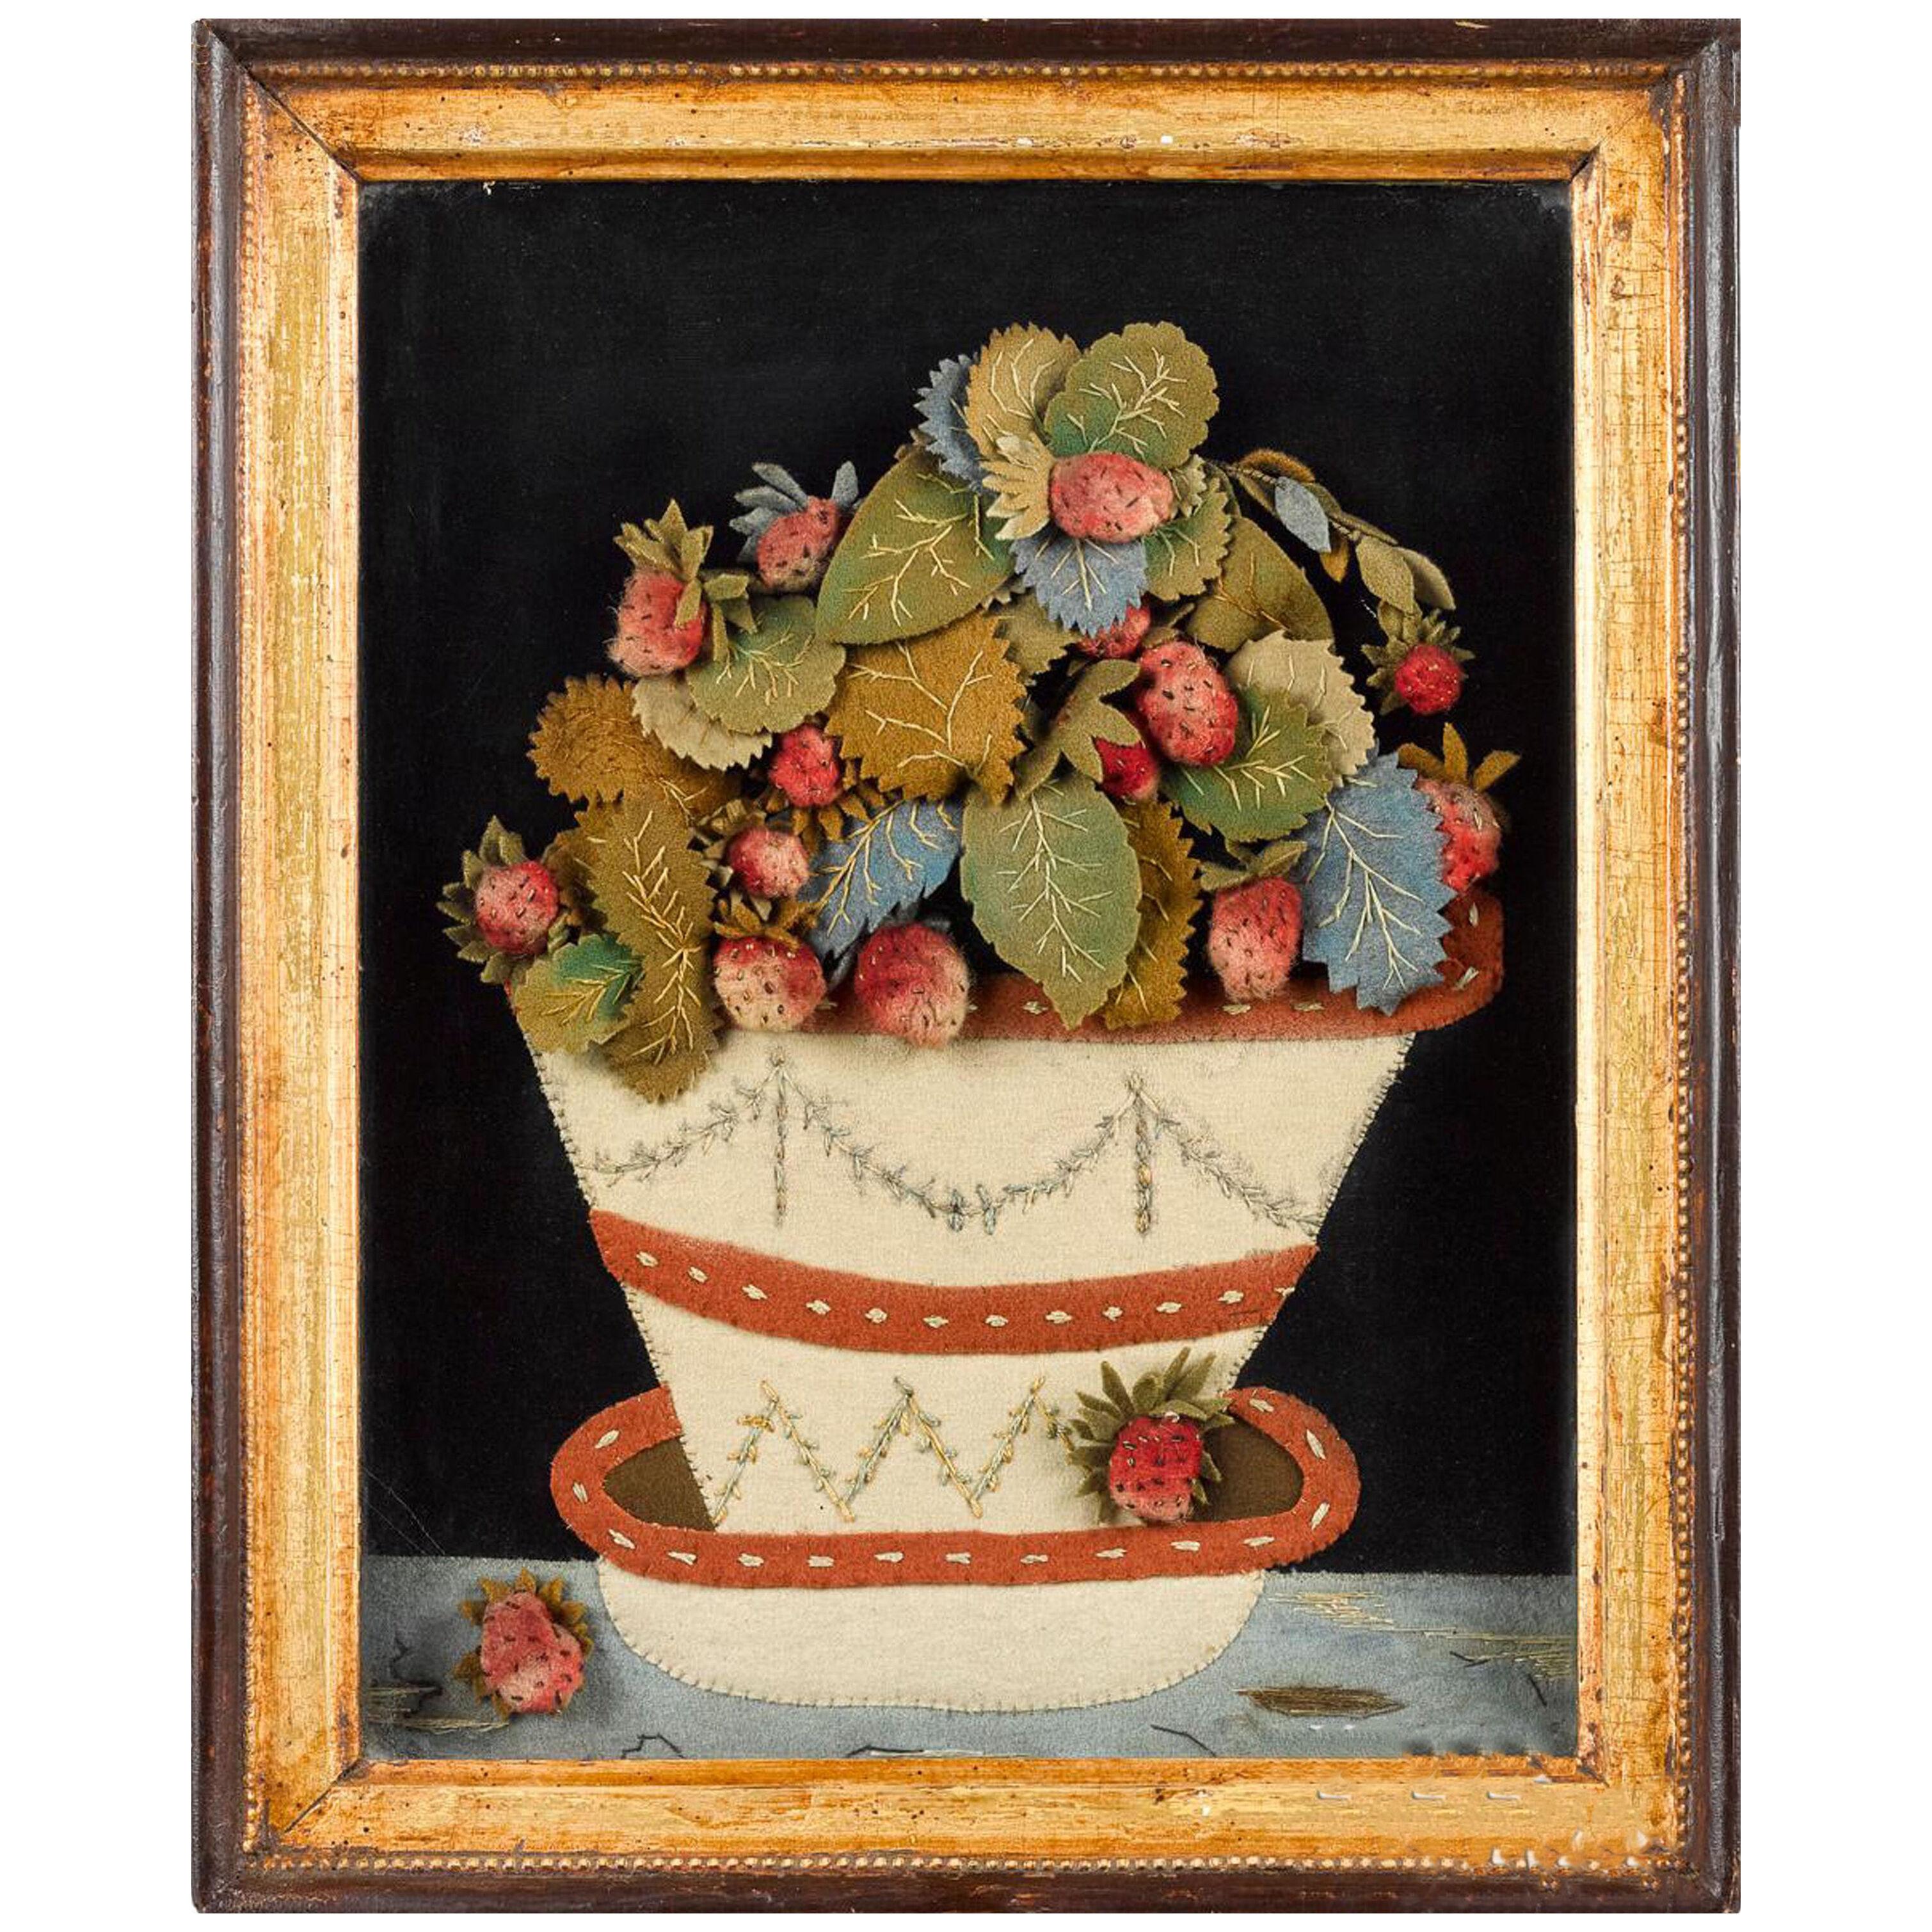 Antique Folk Art Feltwork Picture of a Strawberry Plant in a Pot